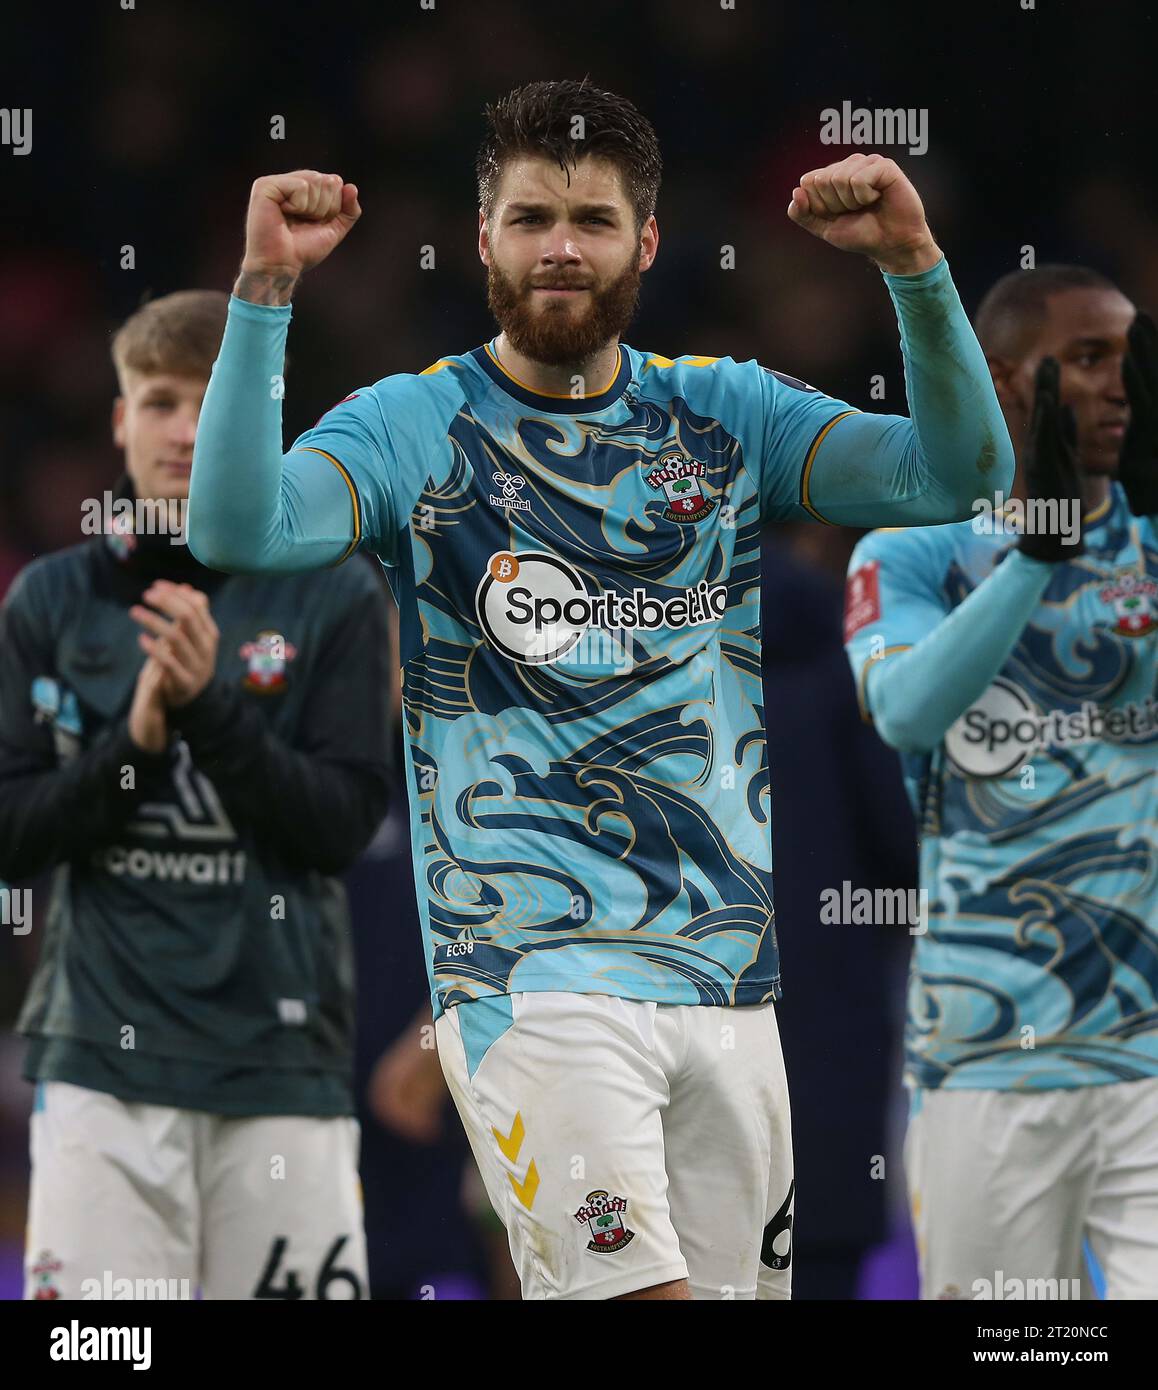 Duje Caleta-Car of Southampton celebrates the victory. - Crystal Palace v Southampton, The Emirates FA Cup, 3rd Round, Selhurst Park, Croydon, UK - 7th January 2023. Editorial Use Only - DataCo restrictions apply Stock Photo